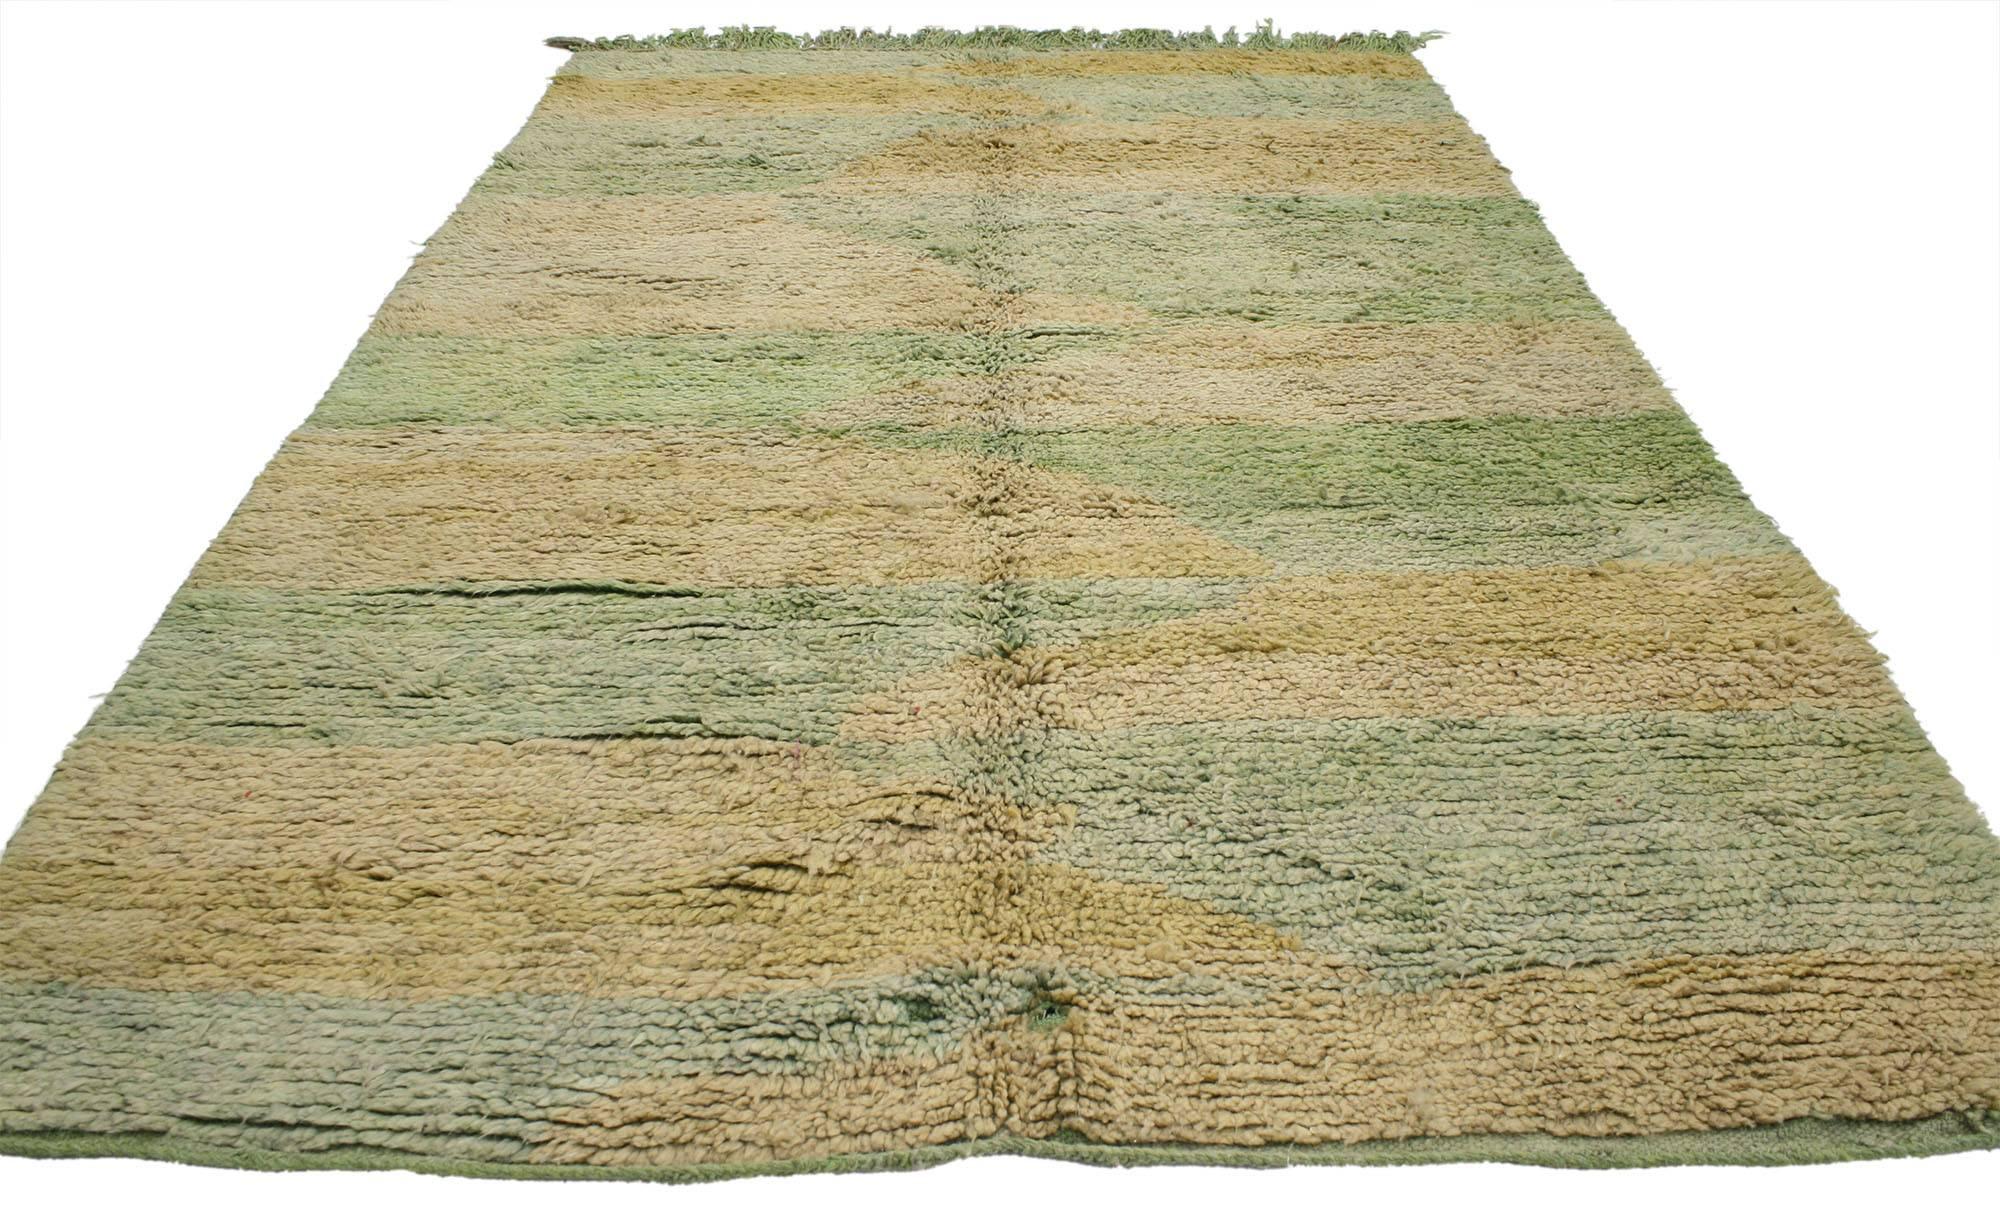 20631 Soft green vintage Berber Moroccan rug with modern style. Featuring rich waves of abrash and the graphic appeal of Folk Art, this hand-knotted wool soft green vintage Moroccan rug represents modern style while staying true to the authentic